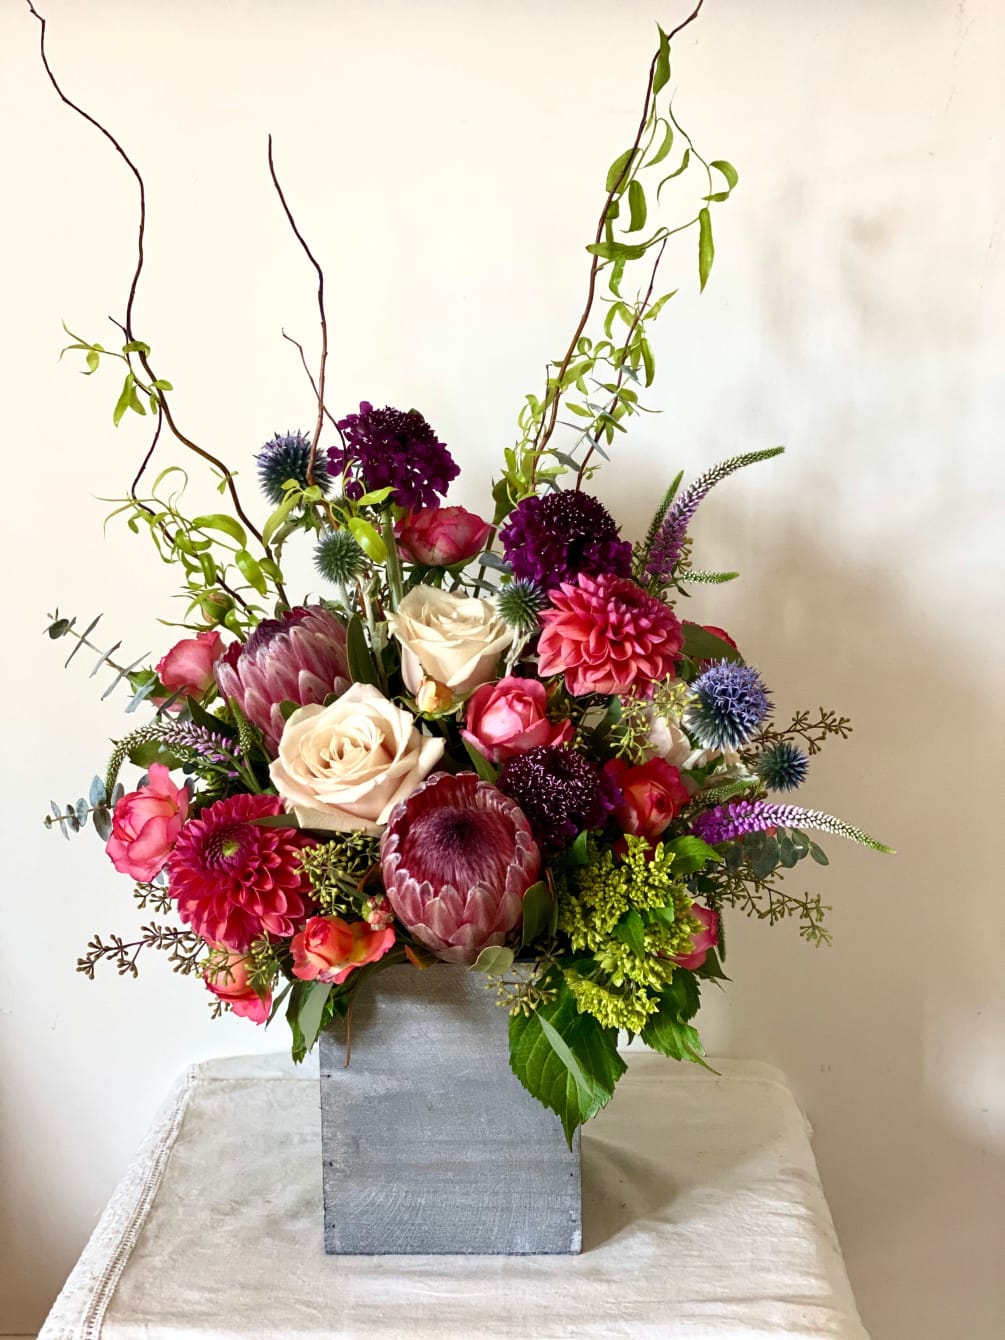 A collection of unique in season blooms, including protea, curly willow, scabiosa